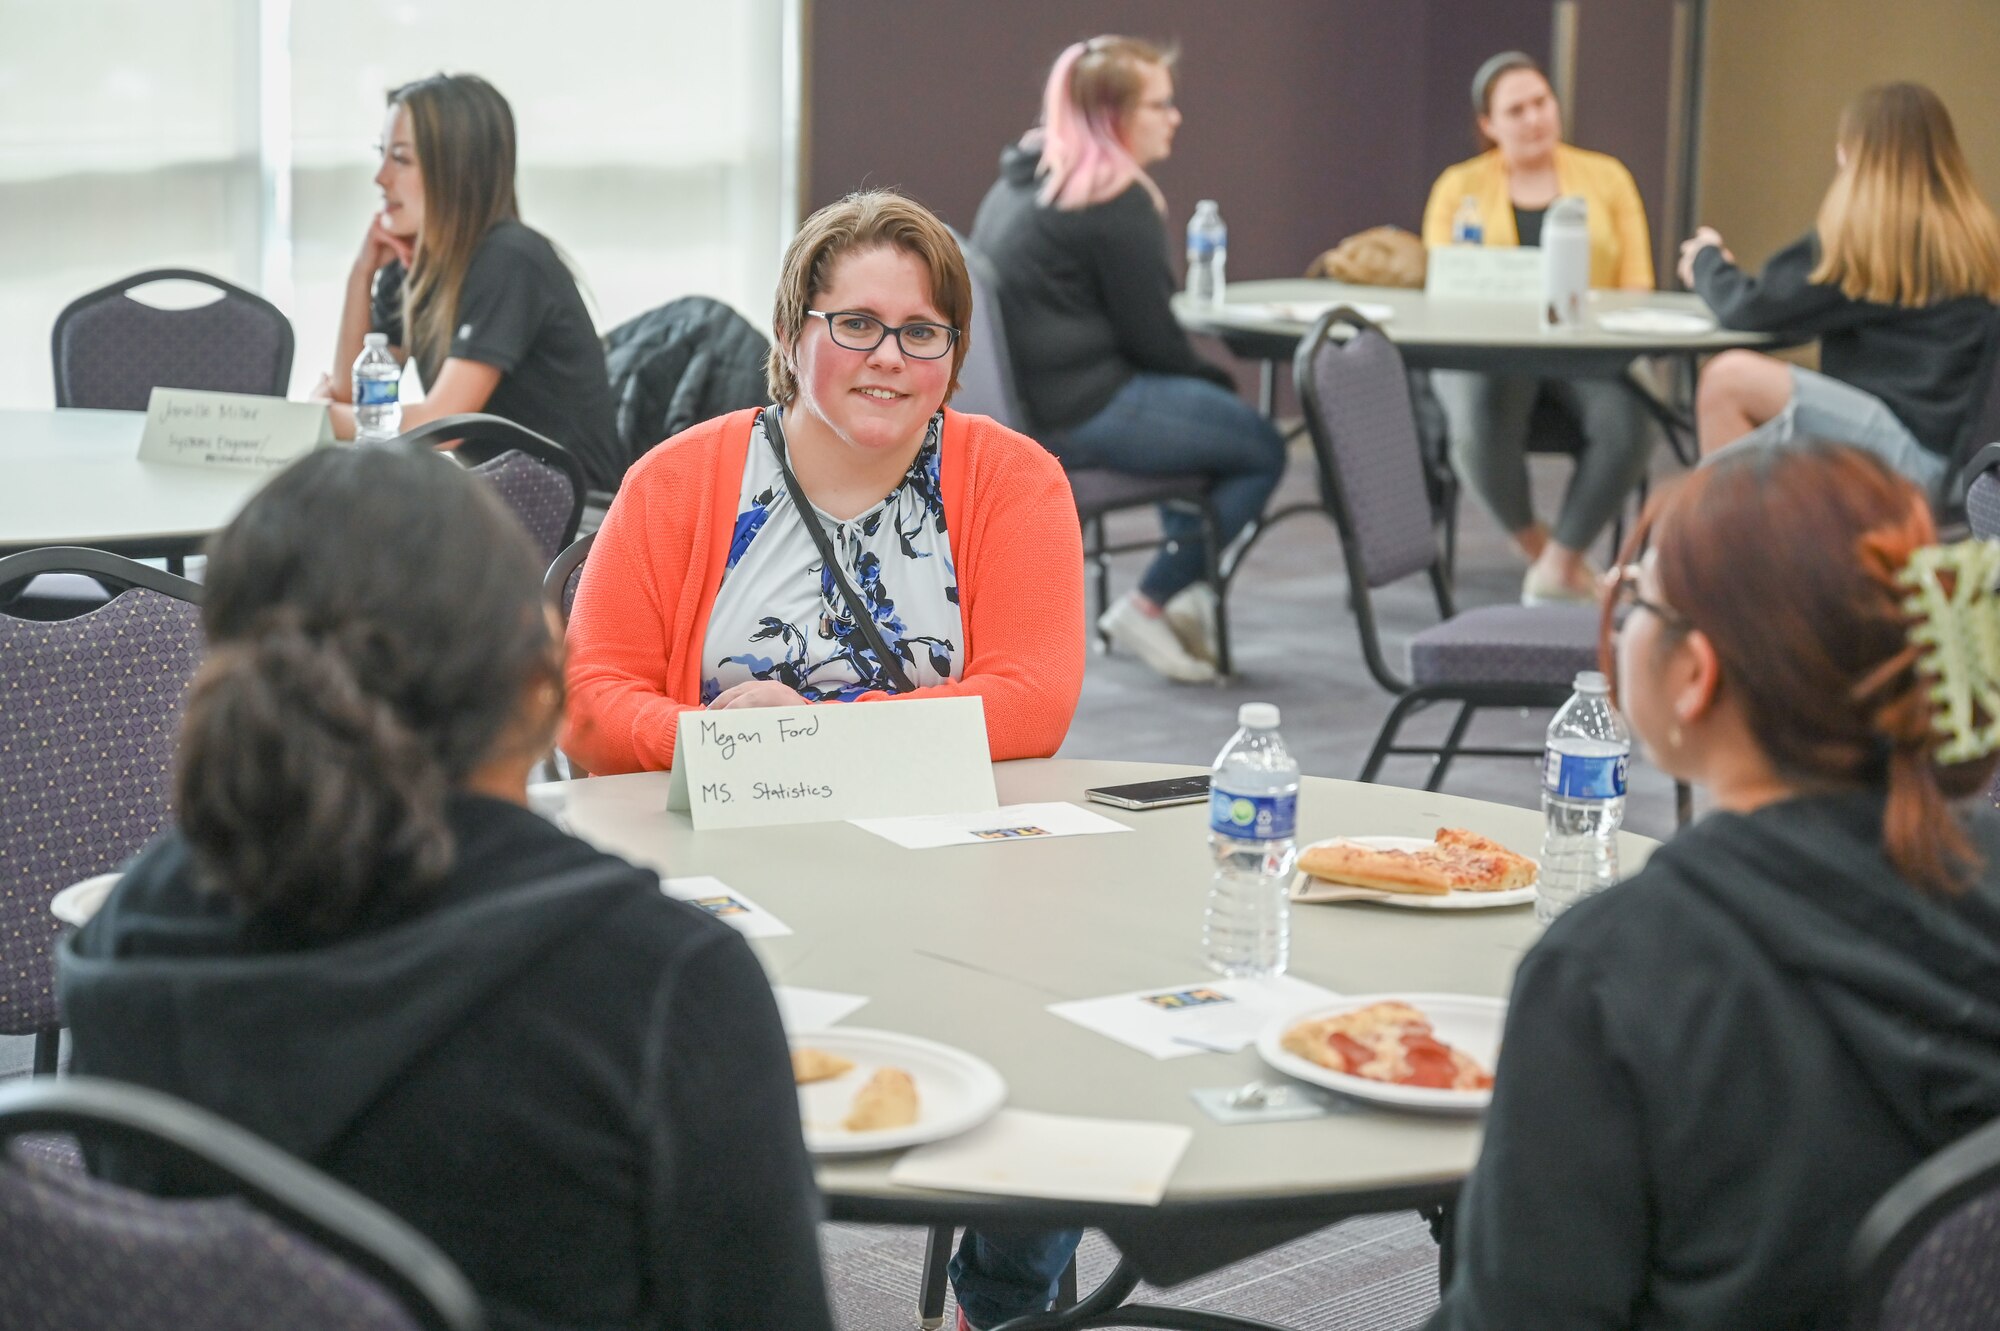 Megan Ford, 309th Software Engineering Group at Hill Air Force Base, Utah, meets with female high school students from NUAMES High School in Layton, during a Science, Technology, Engineering and Math (STEM) event March 30, 2023